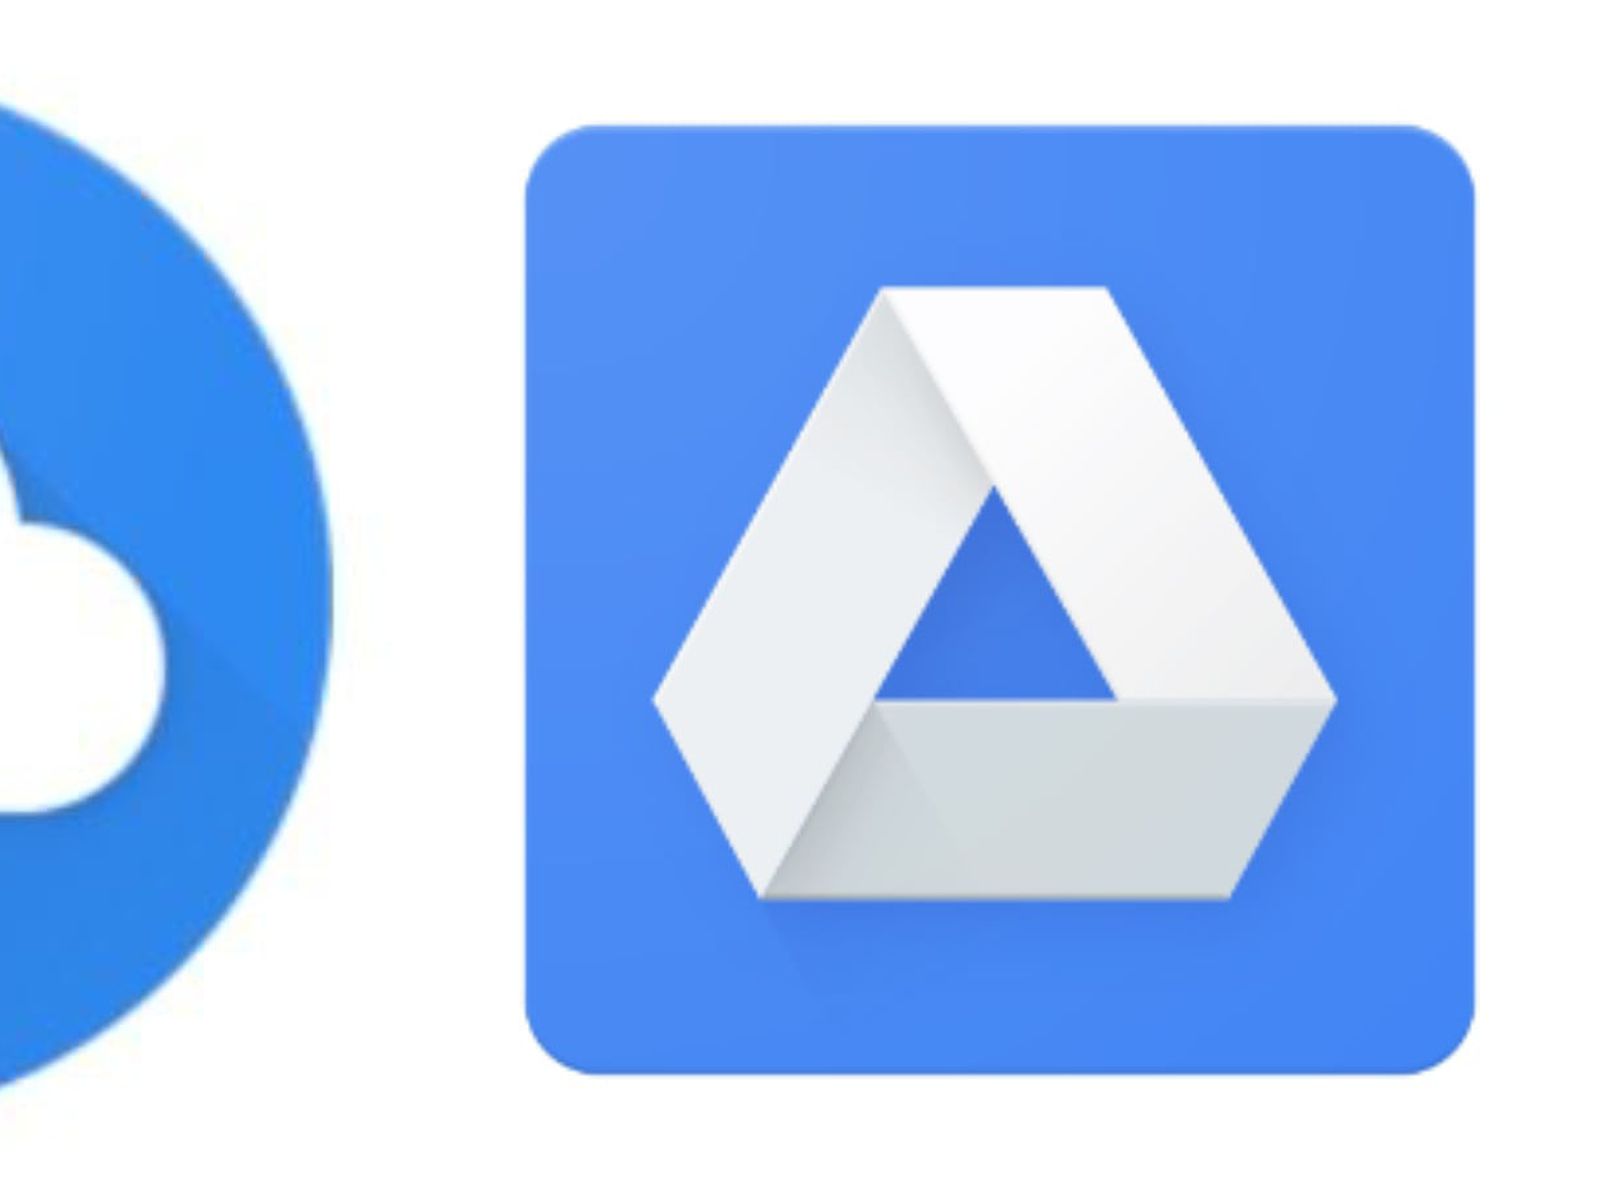 google drive for mac/pc is going away soon to continue syncing files on your desktop